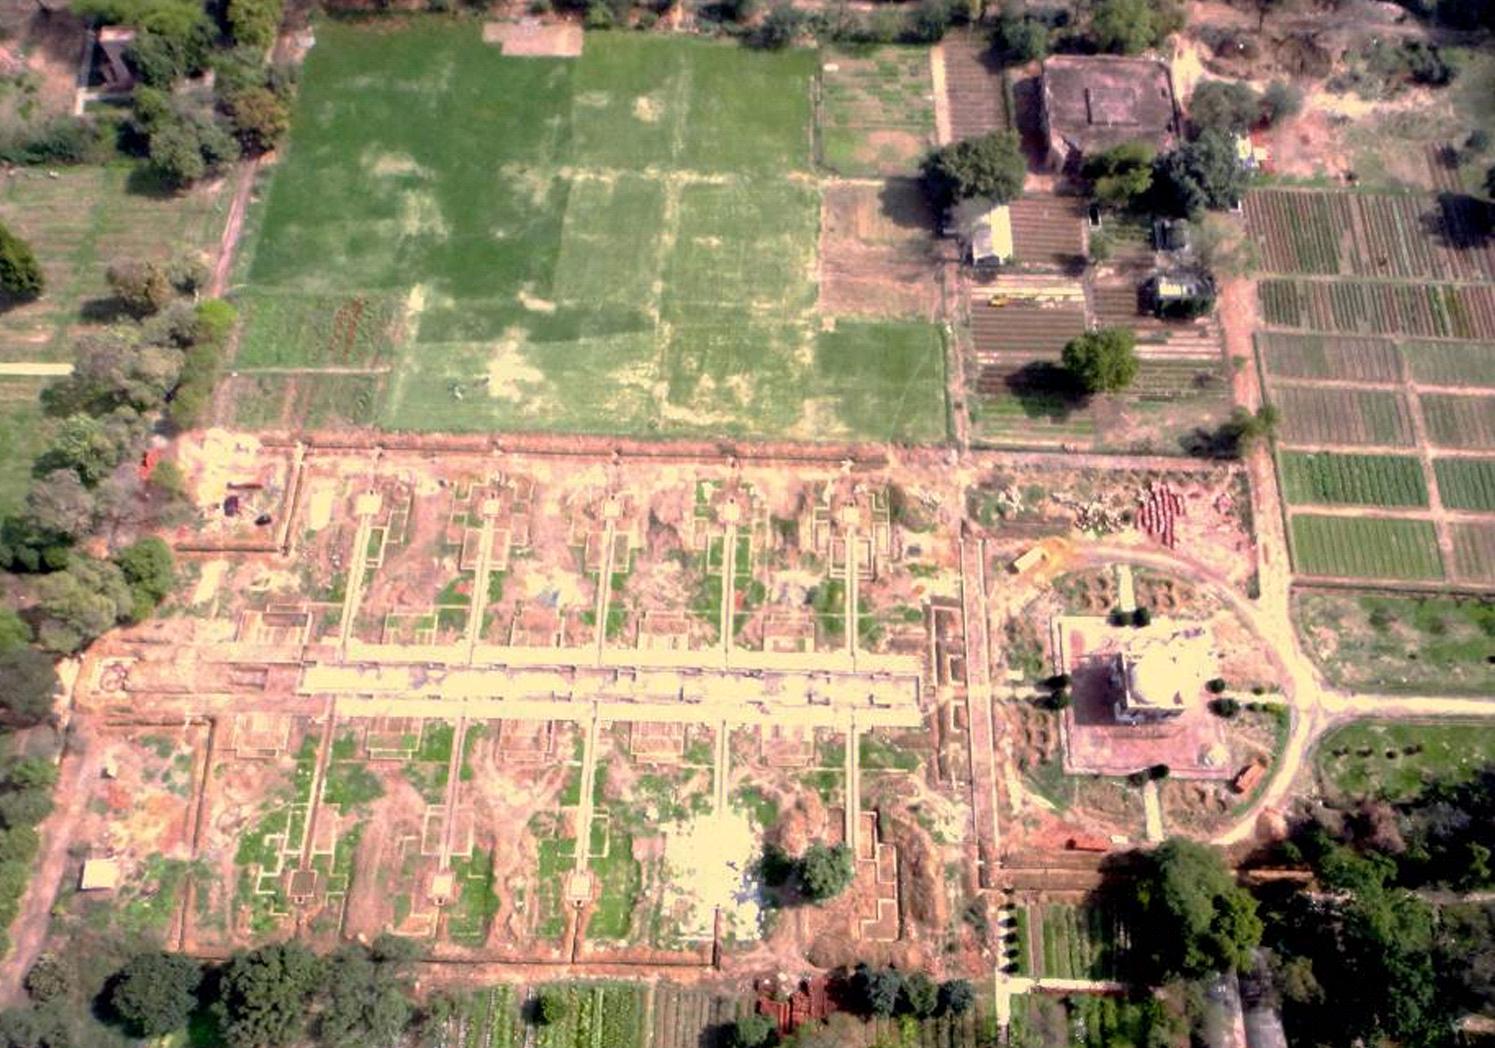 Aerial view of central axis